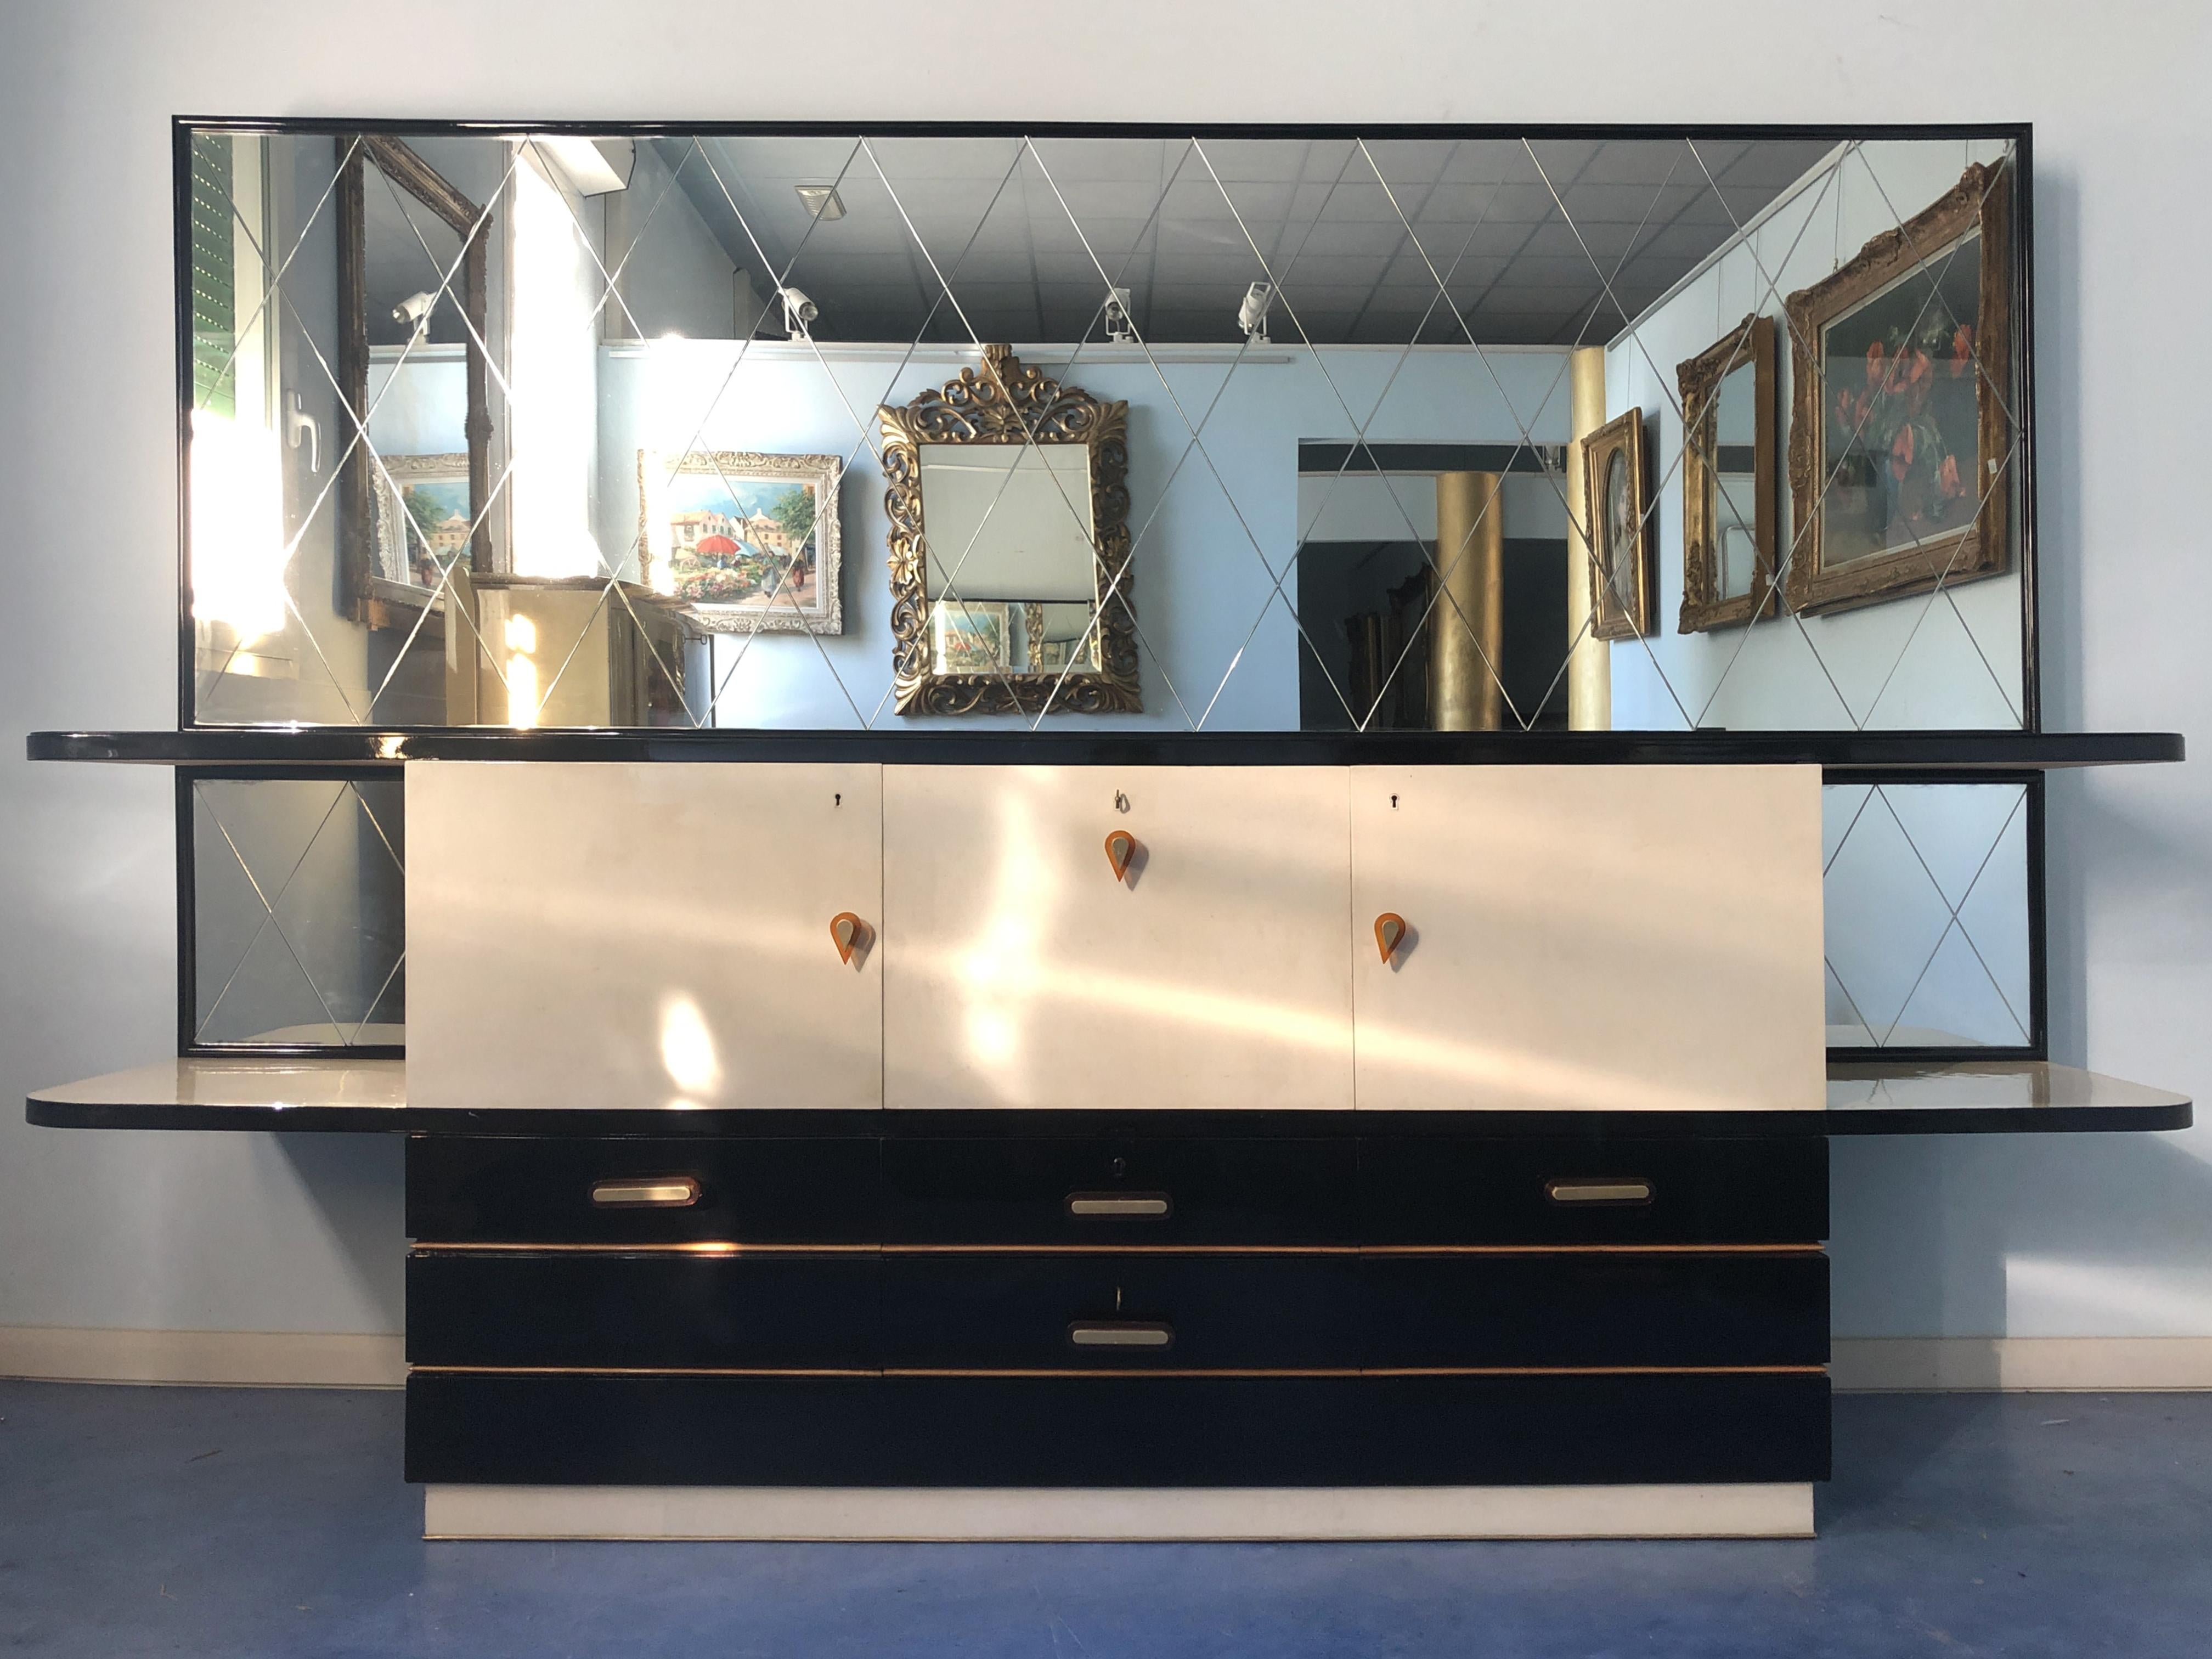 This Italian midcentury sideboard has splendid contrast movement of the lines, the lower part is lacquered in black, the design takes influence from the geometric rationalism form, the higher part has interesting demilune shape.
The interior is